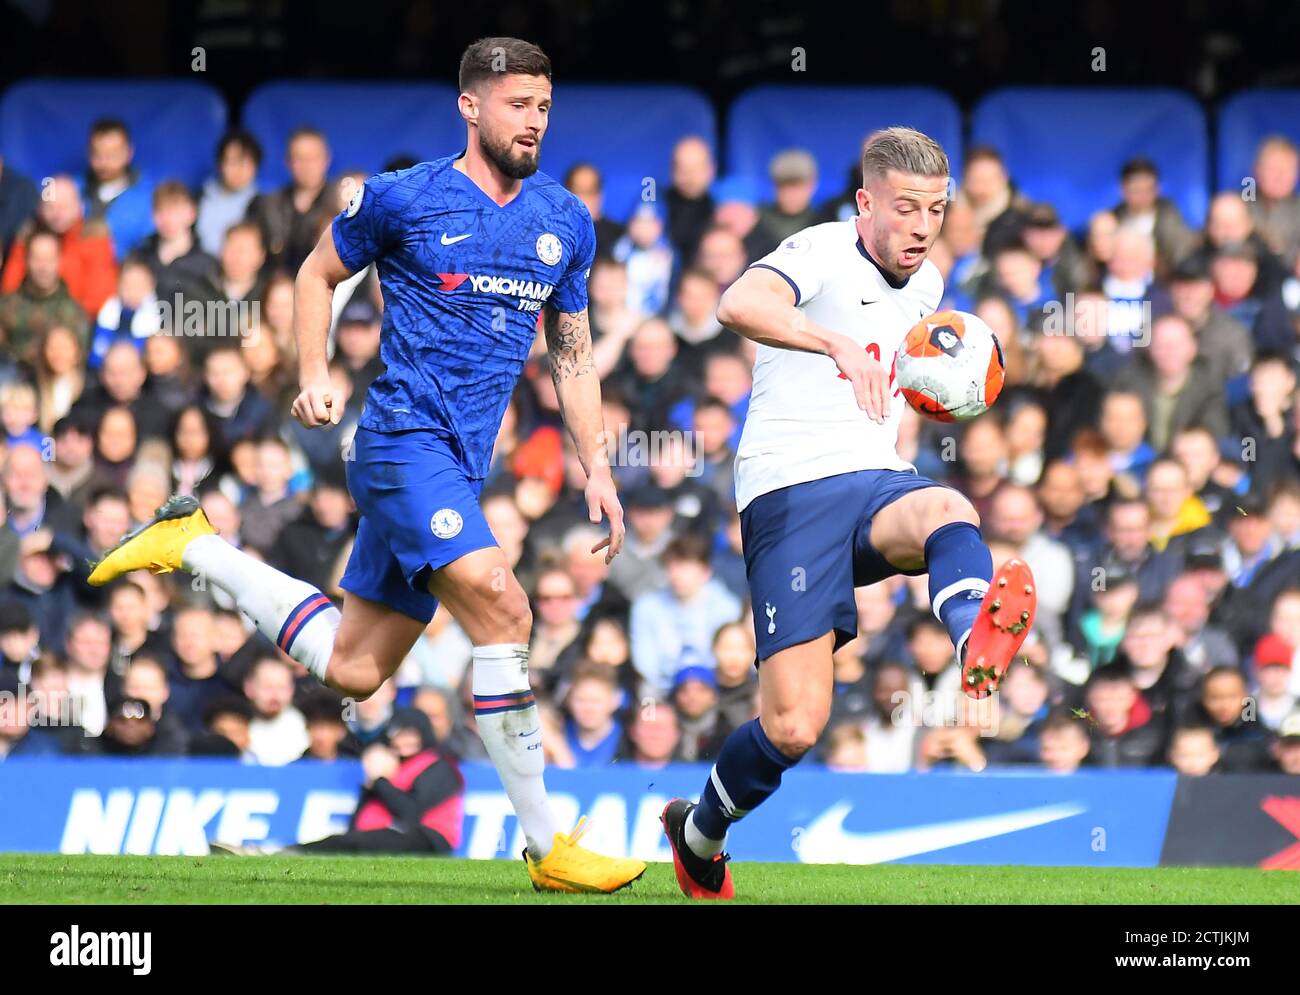 LONDON, ENGLAND - FEBRUARY 22, 2020: Olivier Giroud of Chelsea and Toby Alderweireld of Tottenham pictured during the 2019/20 Premier League game between Chelsea FC and Tottenham Hotspur FC at Stamford Bridge. Stock Photo